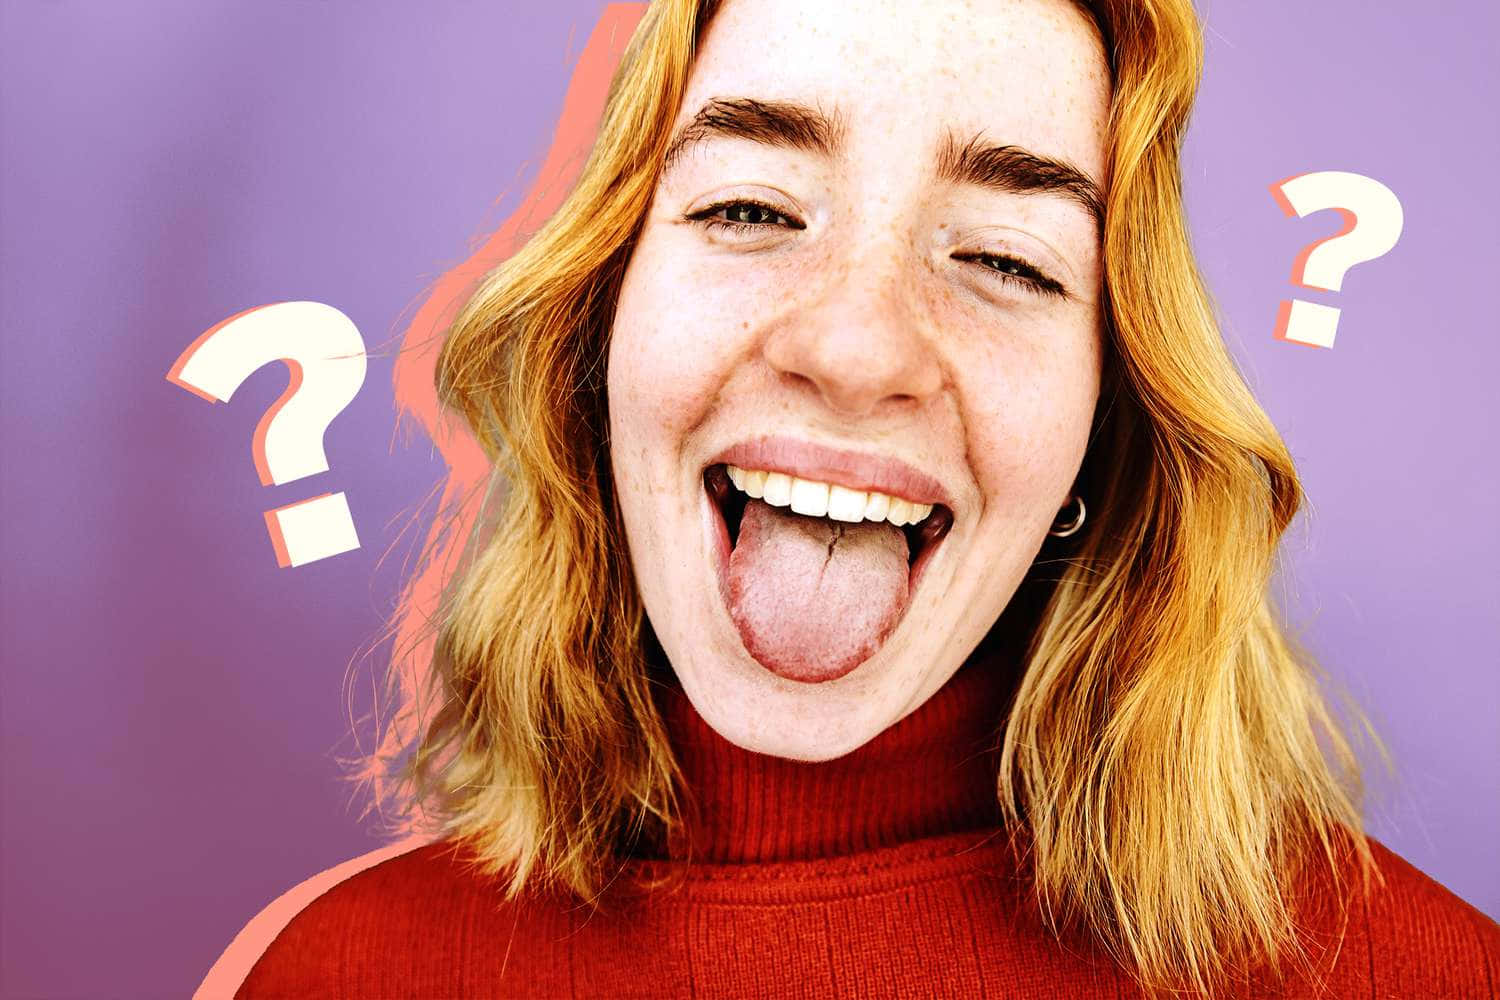 Girl Tongue Out Question Marks Background